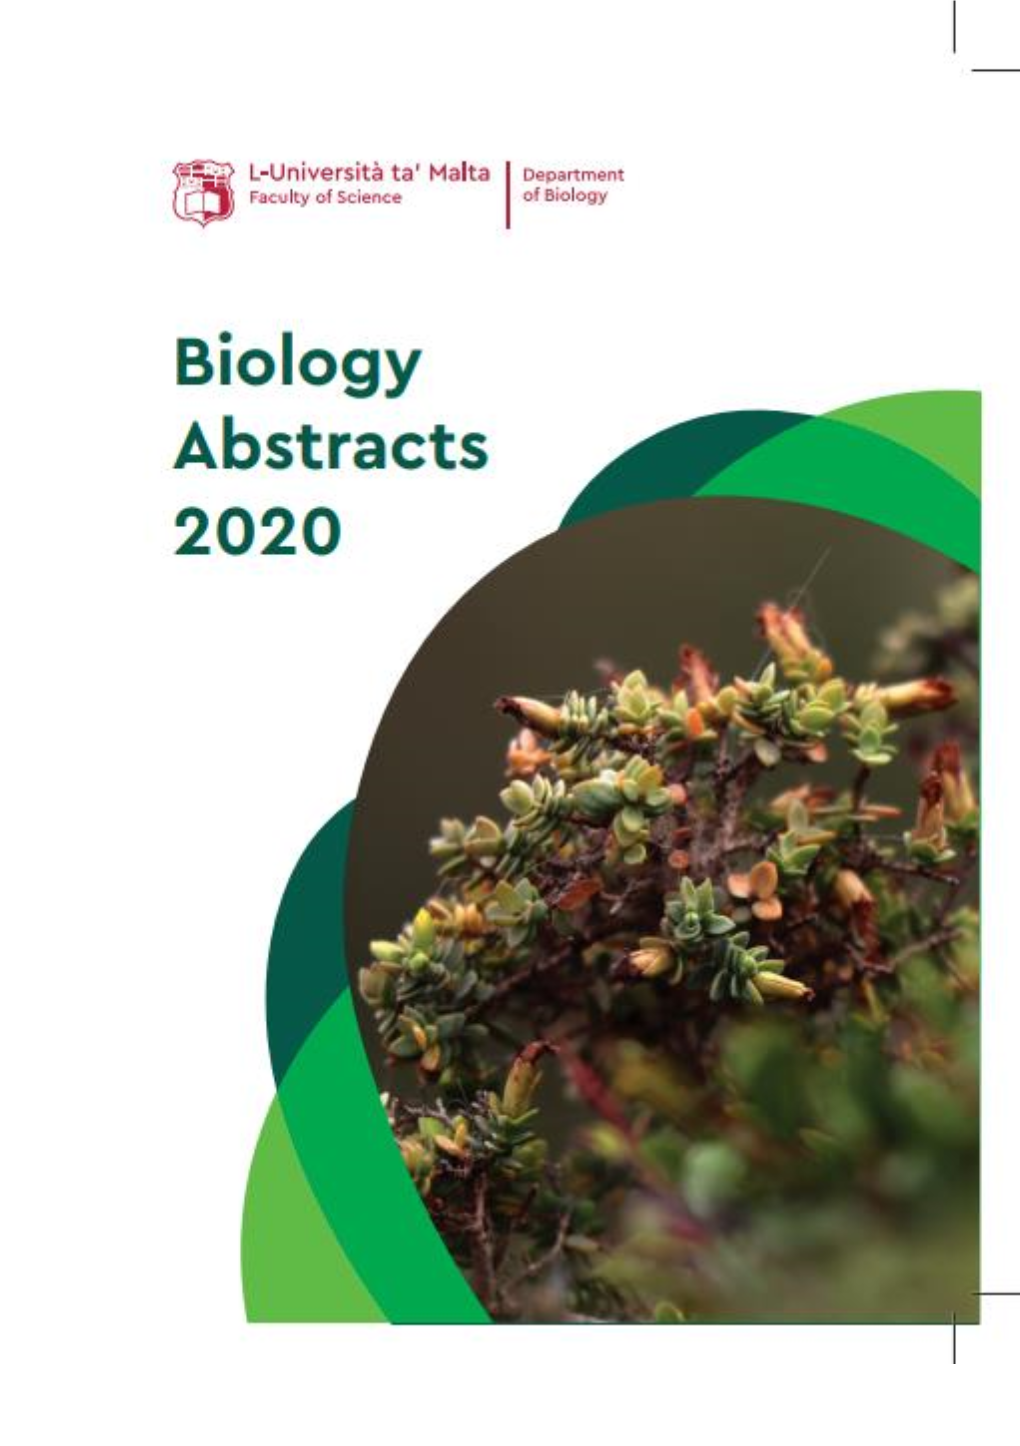 BIOLOGY SYMPOSIUM ONLINE 2020 ABSTRACTS.Pdf